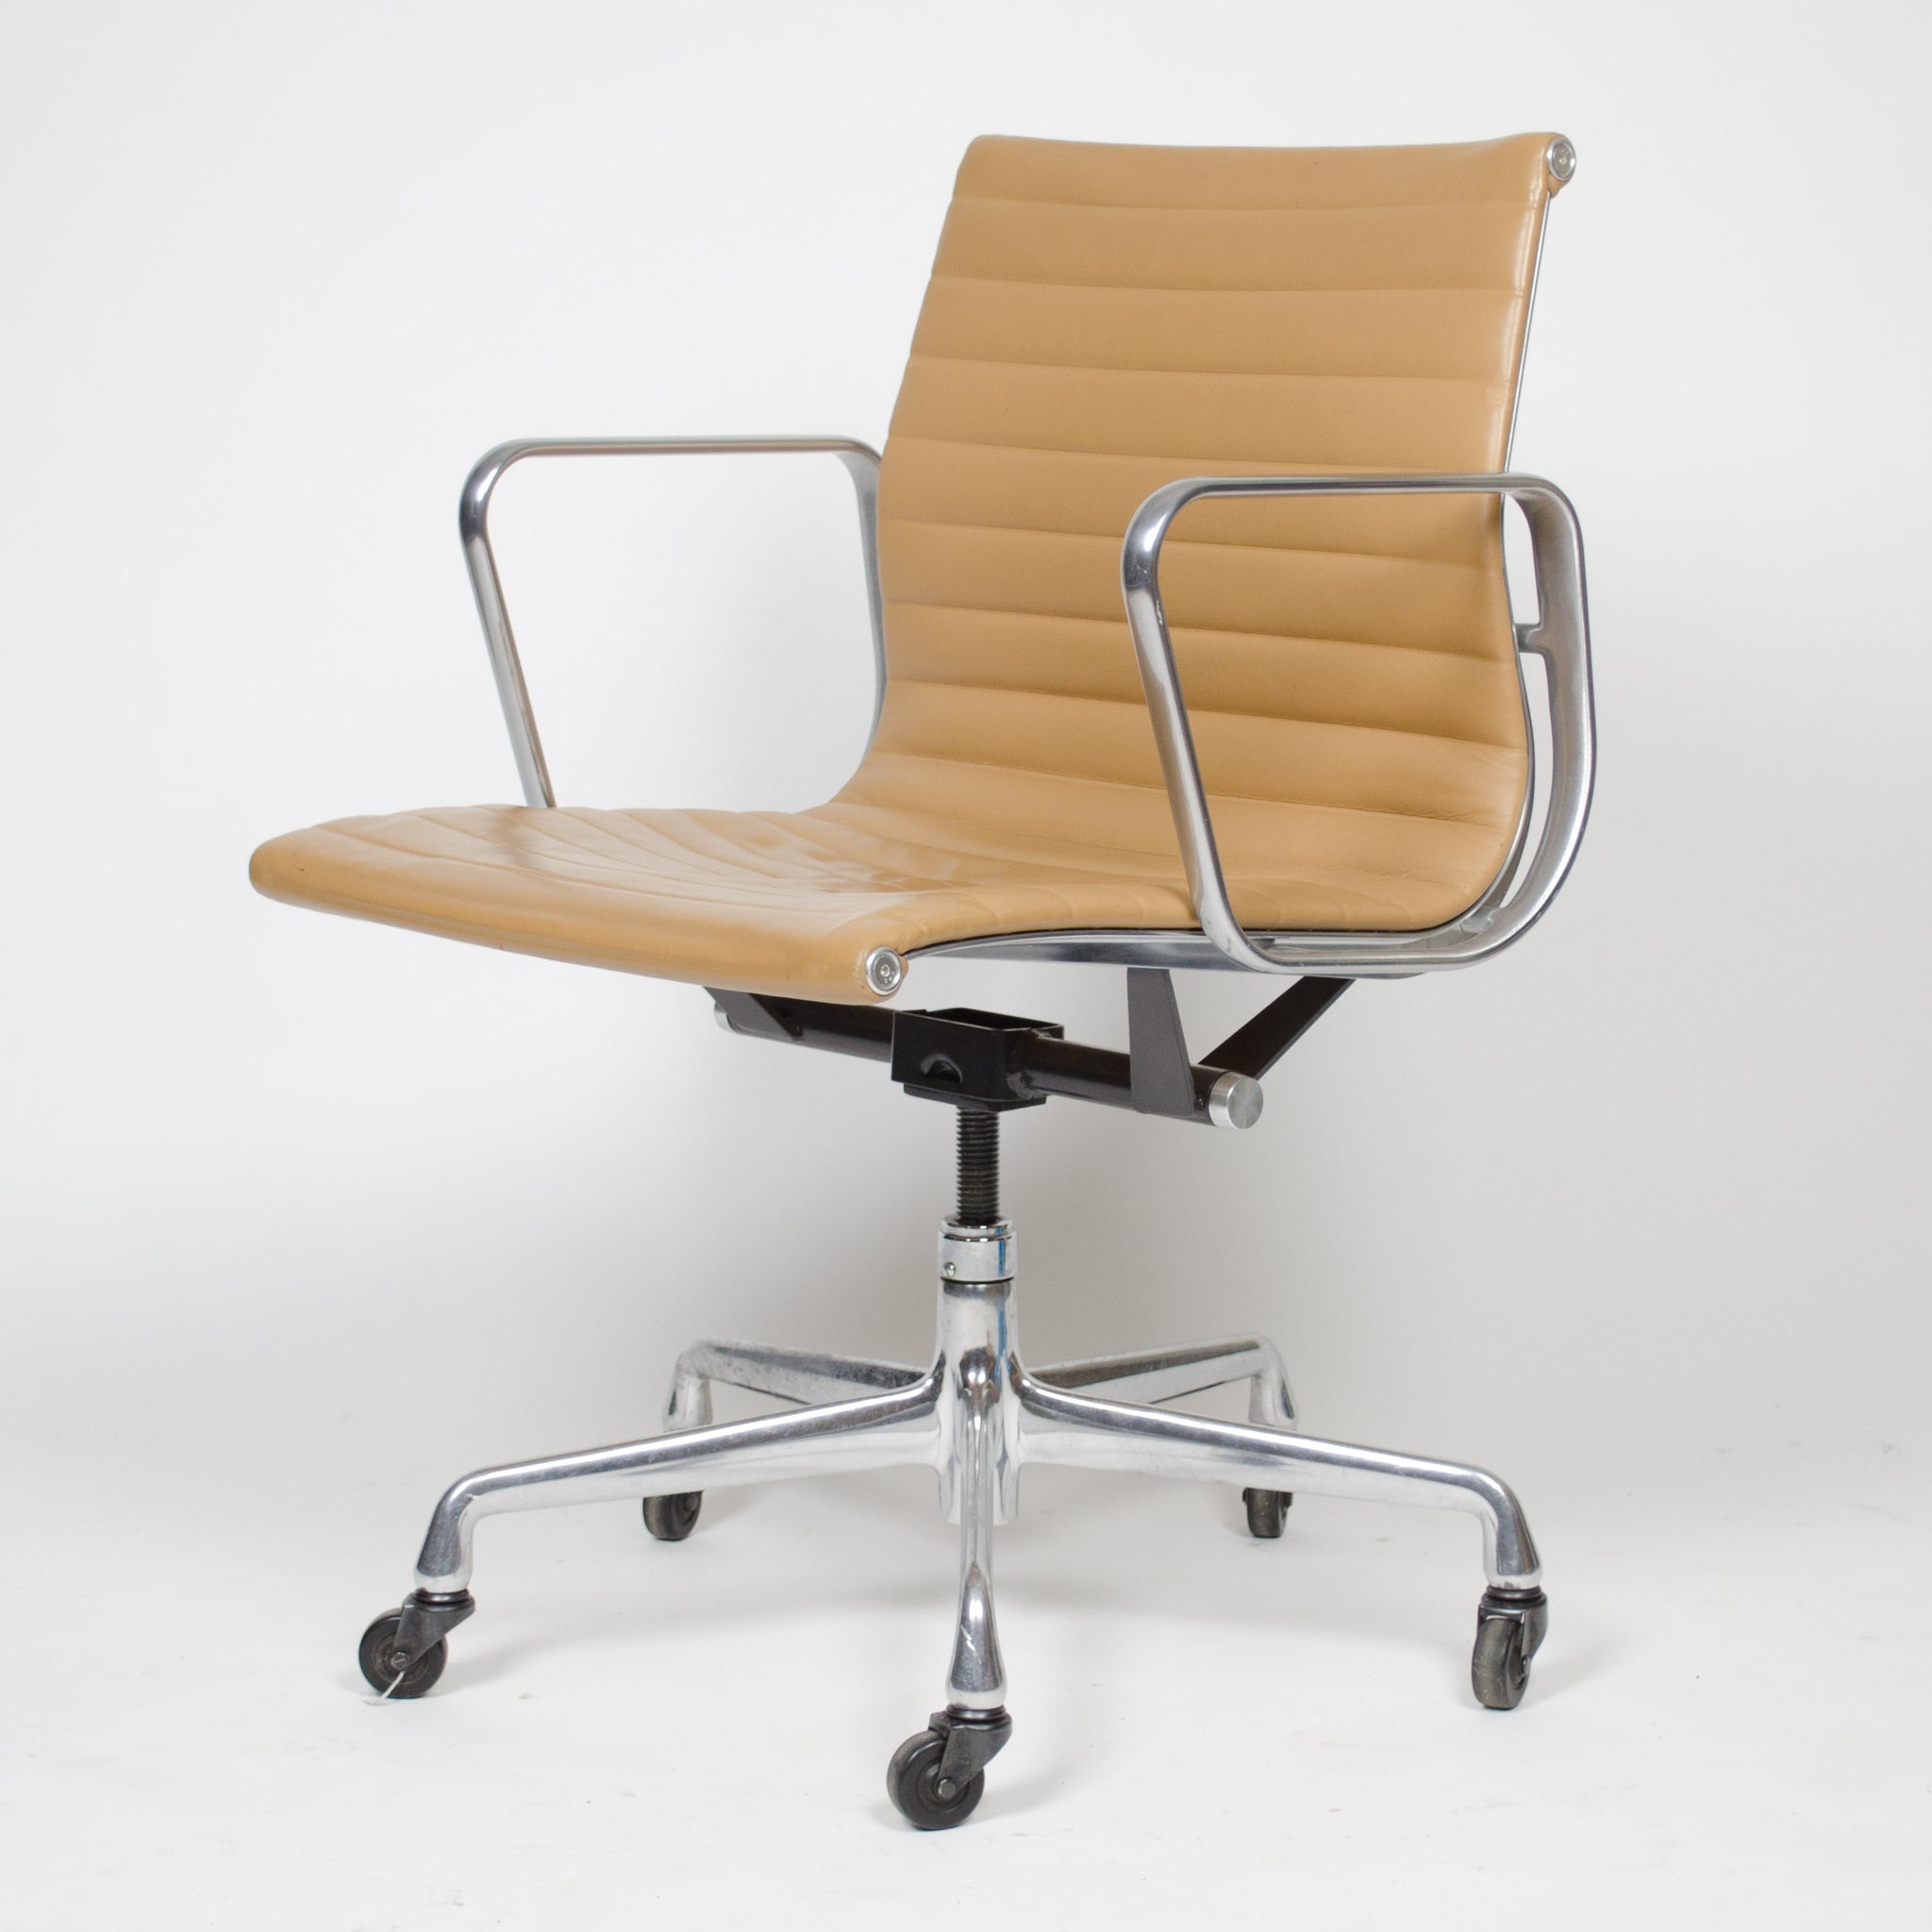 SOLD 2000's Tan Eames Herman Miller Low Aluminum Group Desk Chairs 9 Available